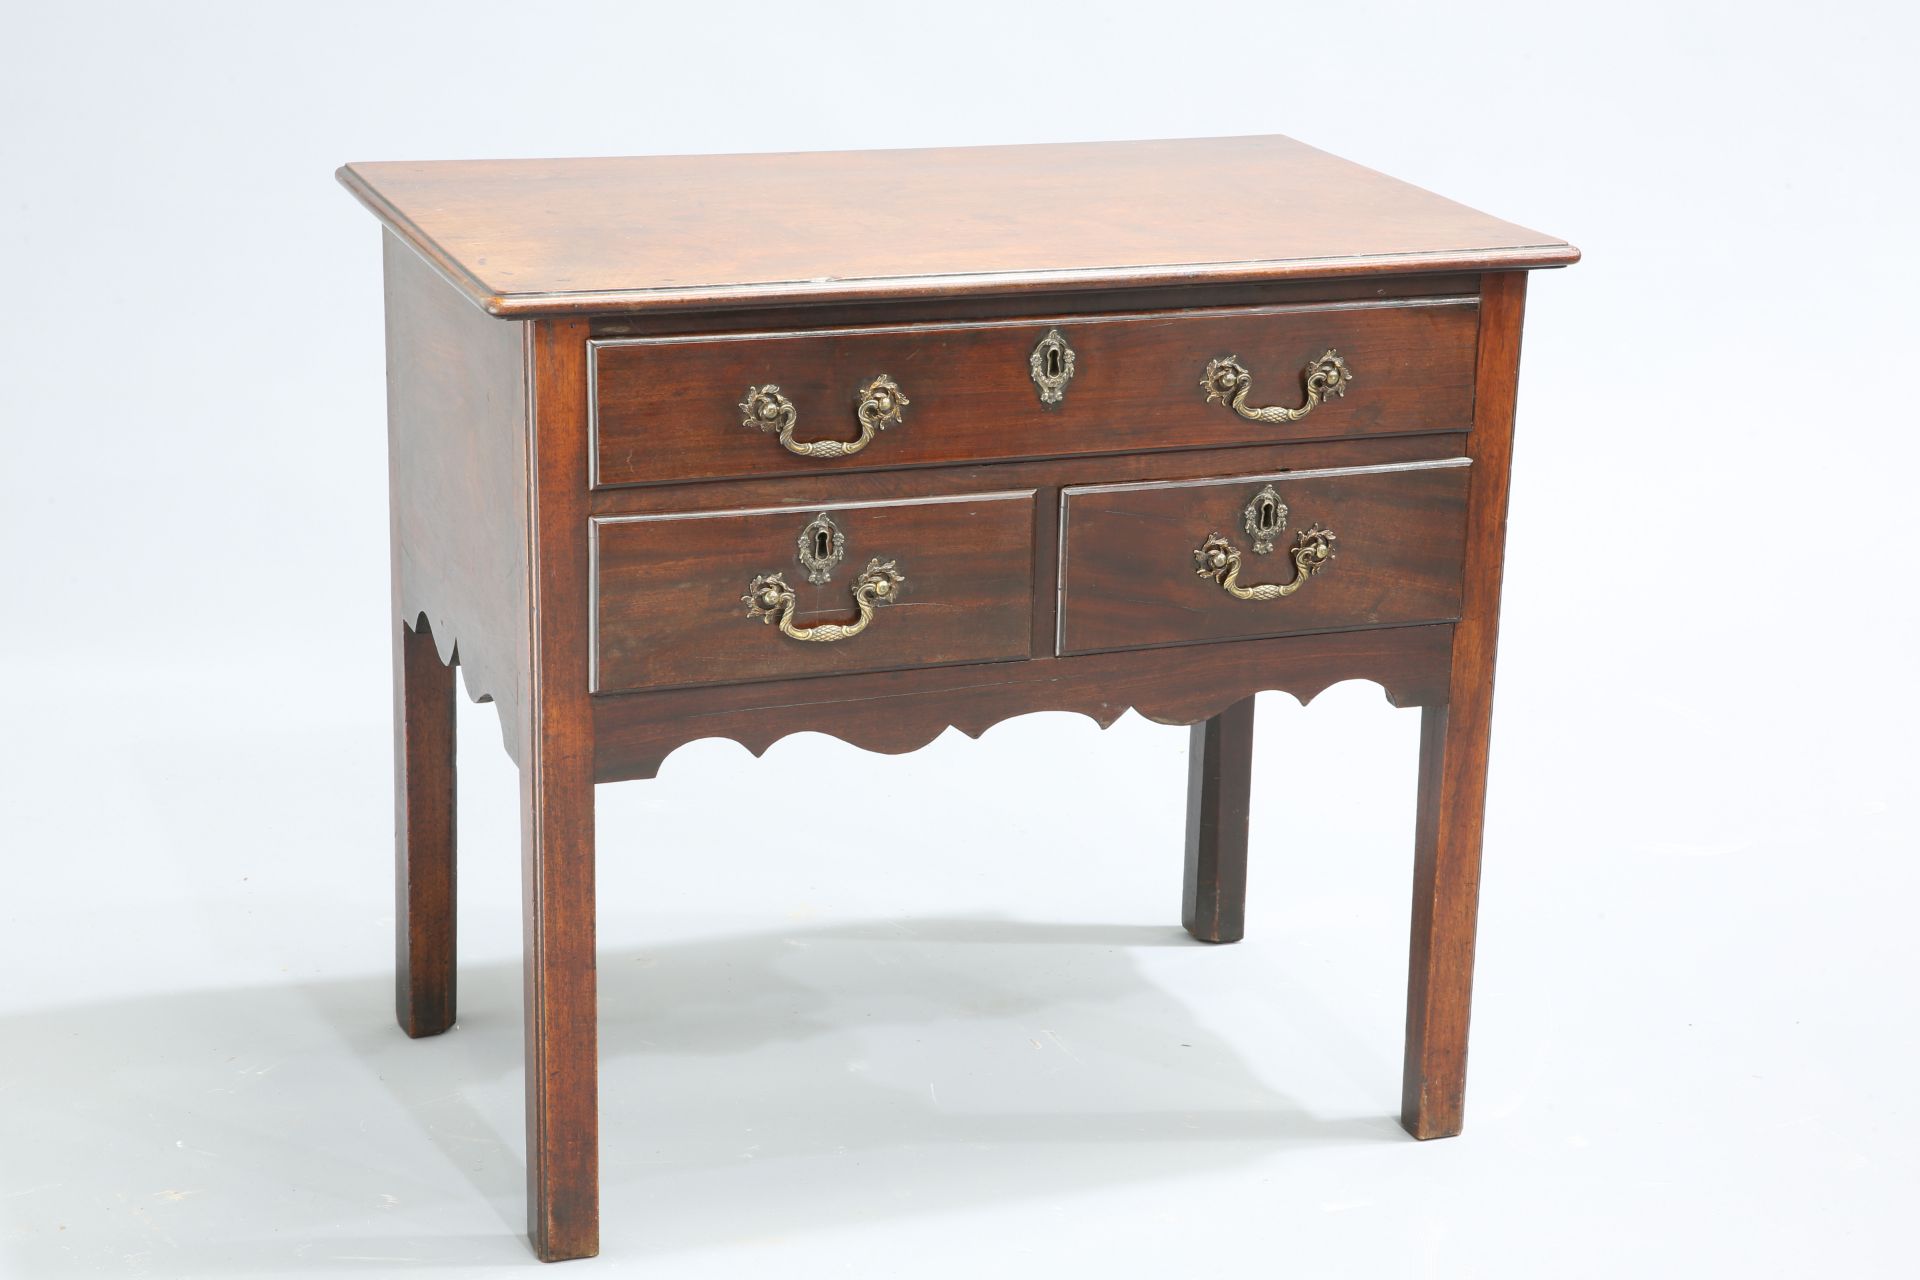 A GEORGE III MAHOGANY LOWBOY, the moulded rectangular top above a long drawer over a pair of short